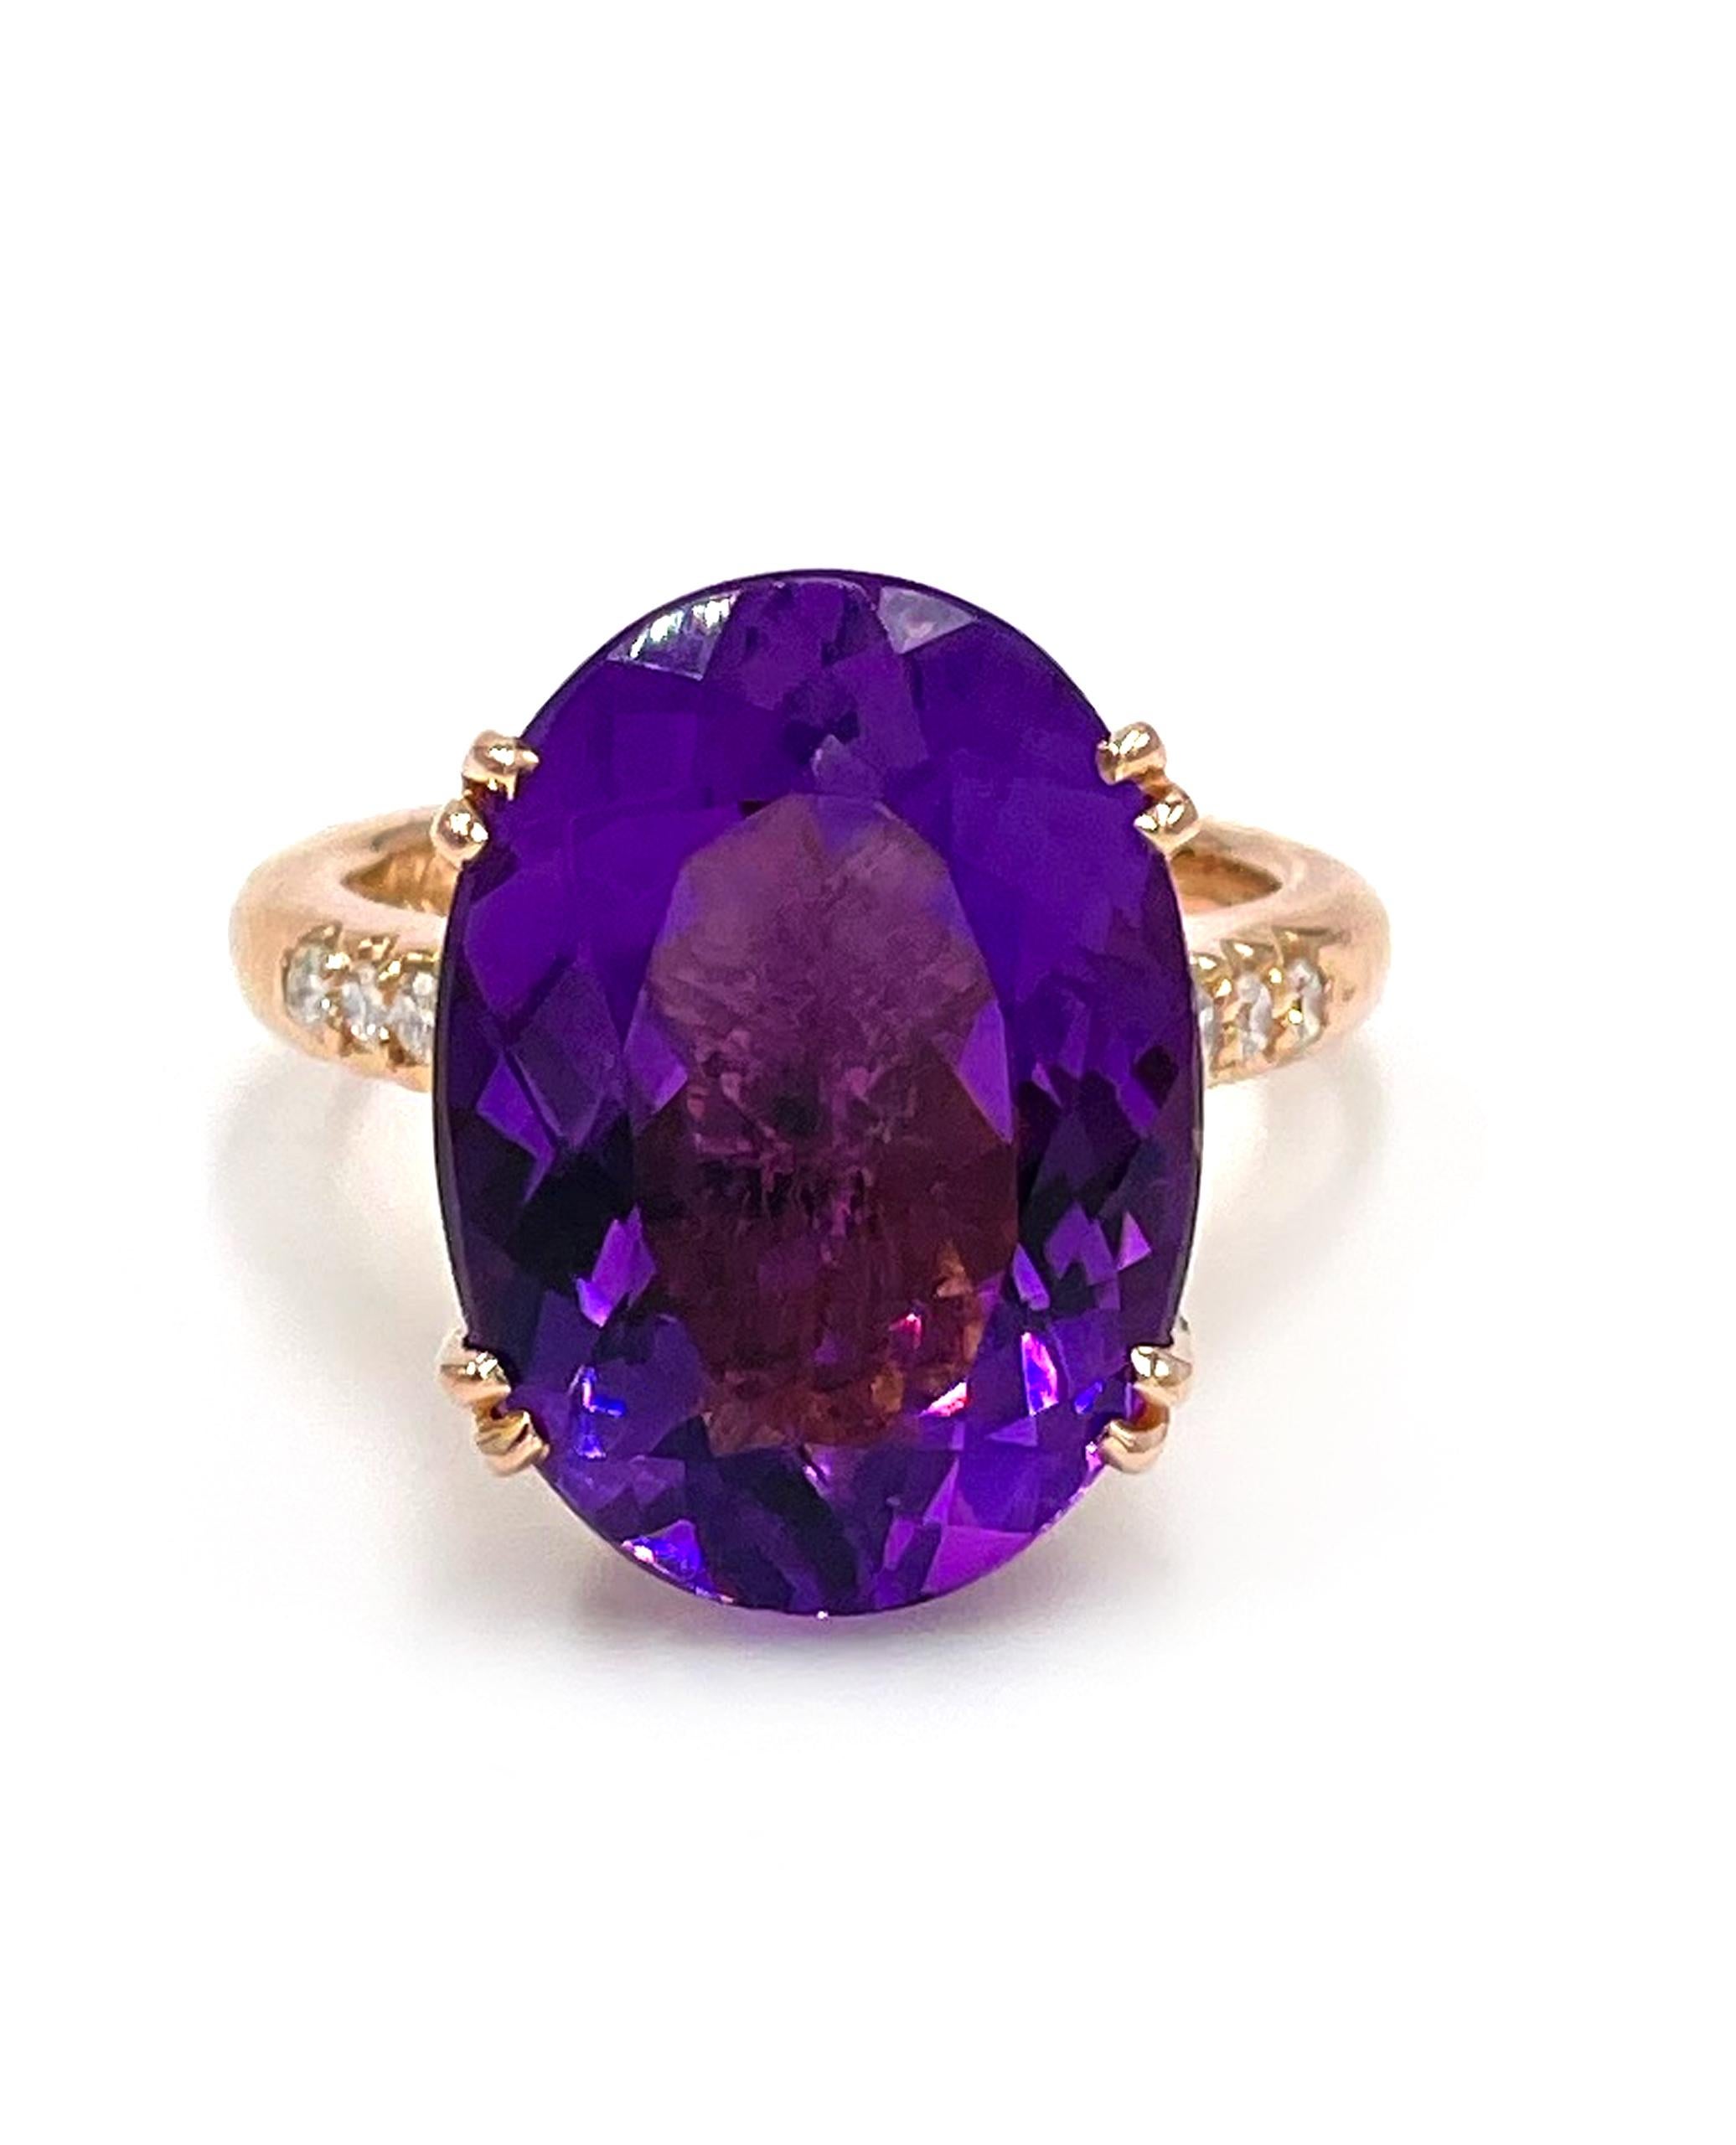 14K rose gold antique inspired ring featuring one center oval shape amethyst weighing 10.75 carats.  The ring is also furnished with 50 round brilliant-cut diamonds 0.45 carats total weight. 

* Amethyst measures approximately 18.00 x 1 3.12mm
*